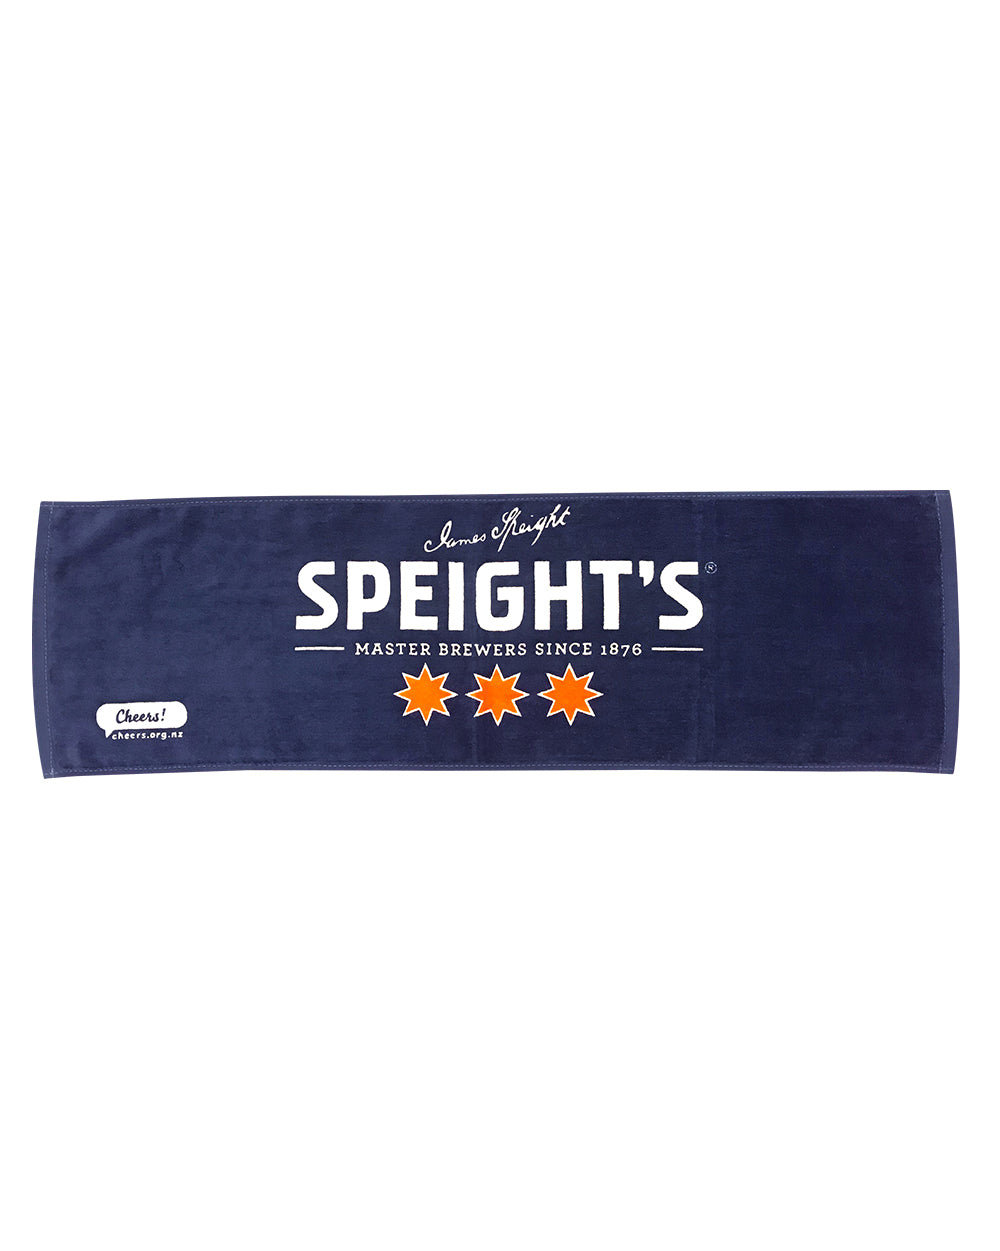 Speight's Bar Towel -  Beer Gear Apparel & Merchandise - Speights - Lion Red - VB - Tokyo Dy merch